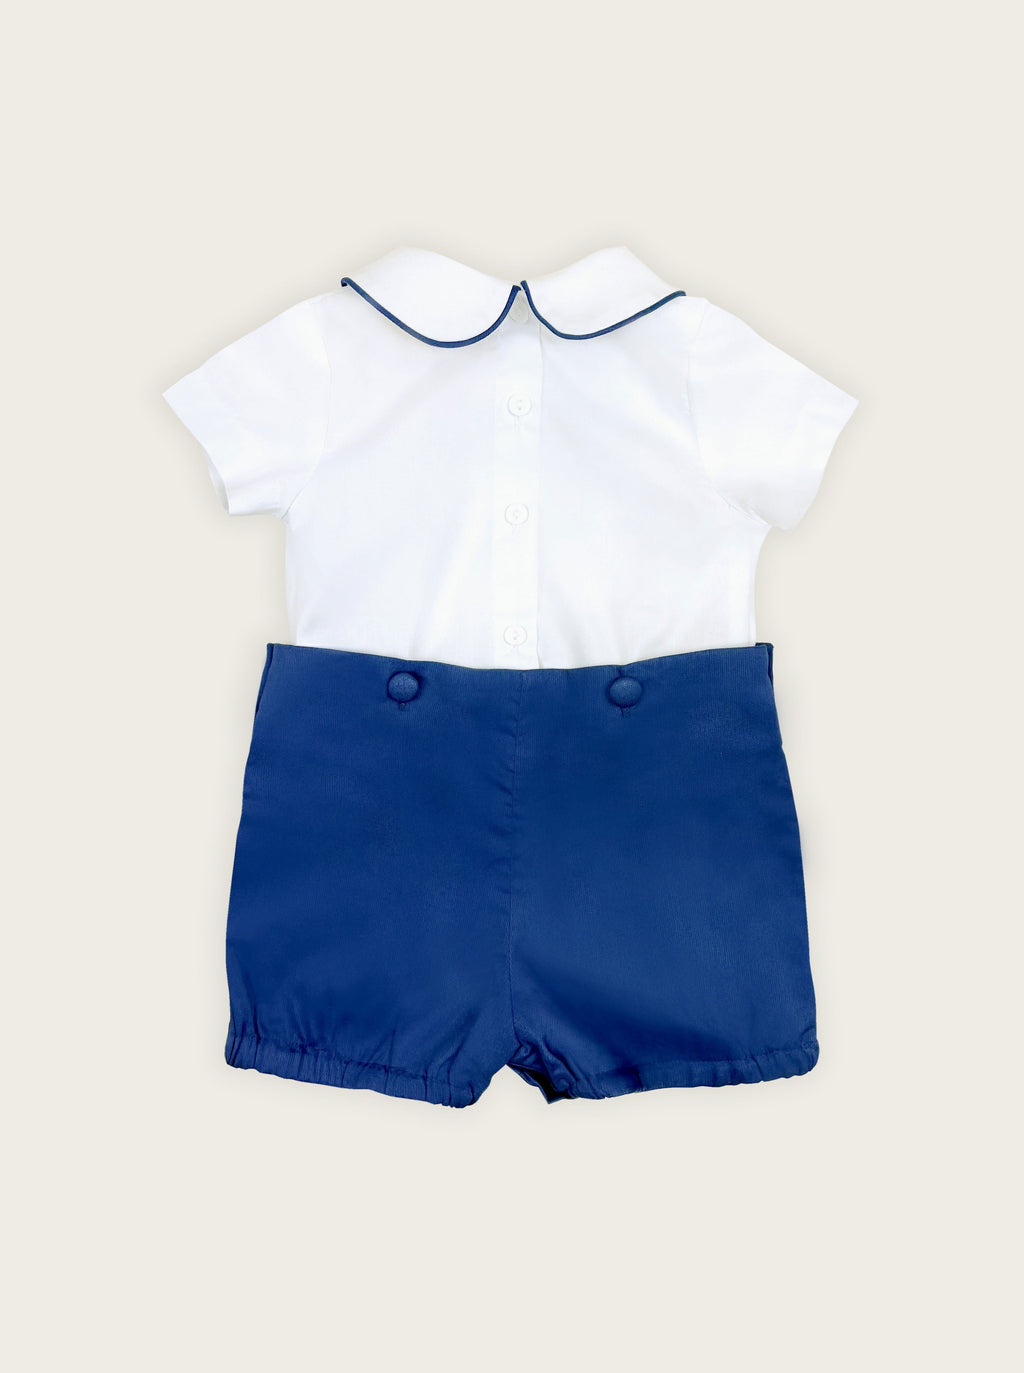 Buster Suit Set - White and Marine Blue front